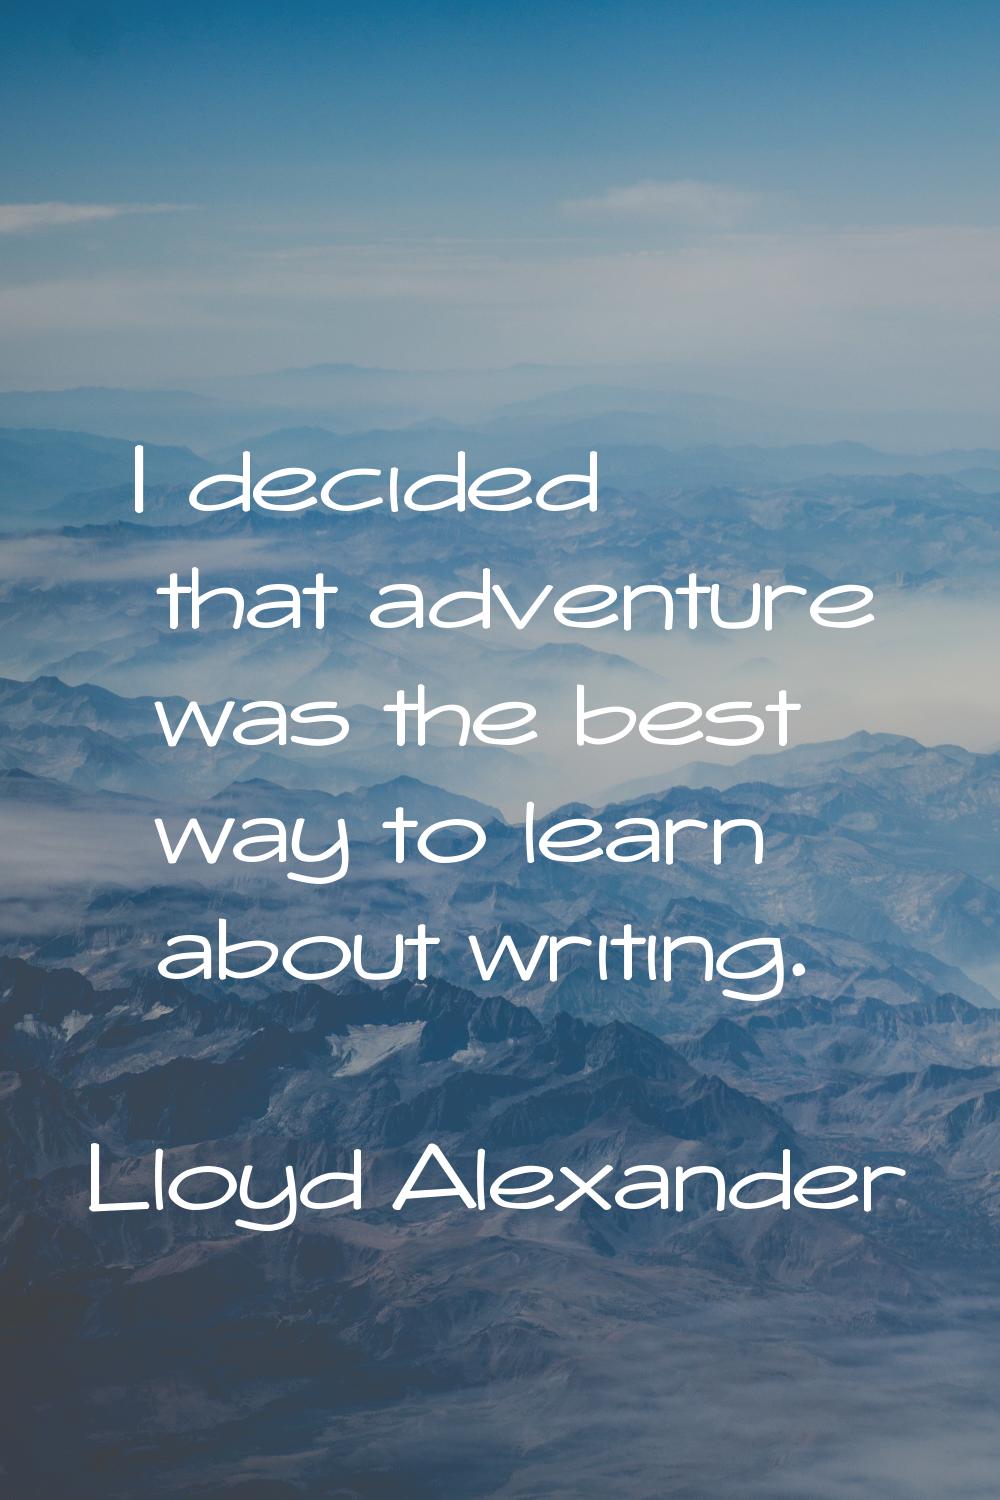 I decided that adventure was the best way to learn about writing.